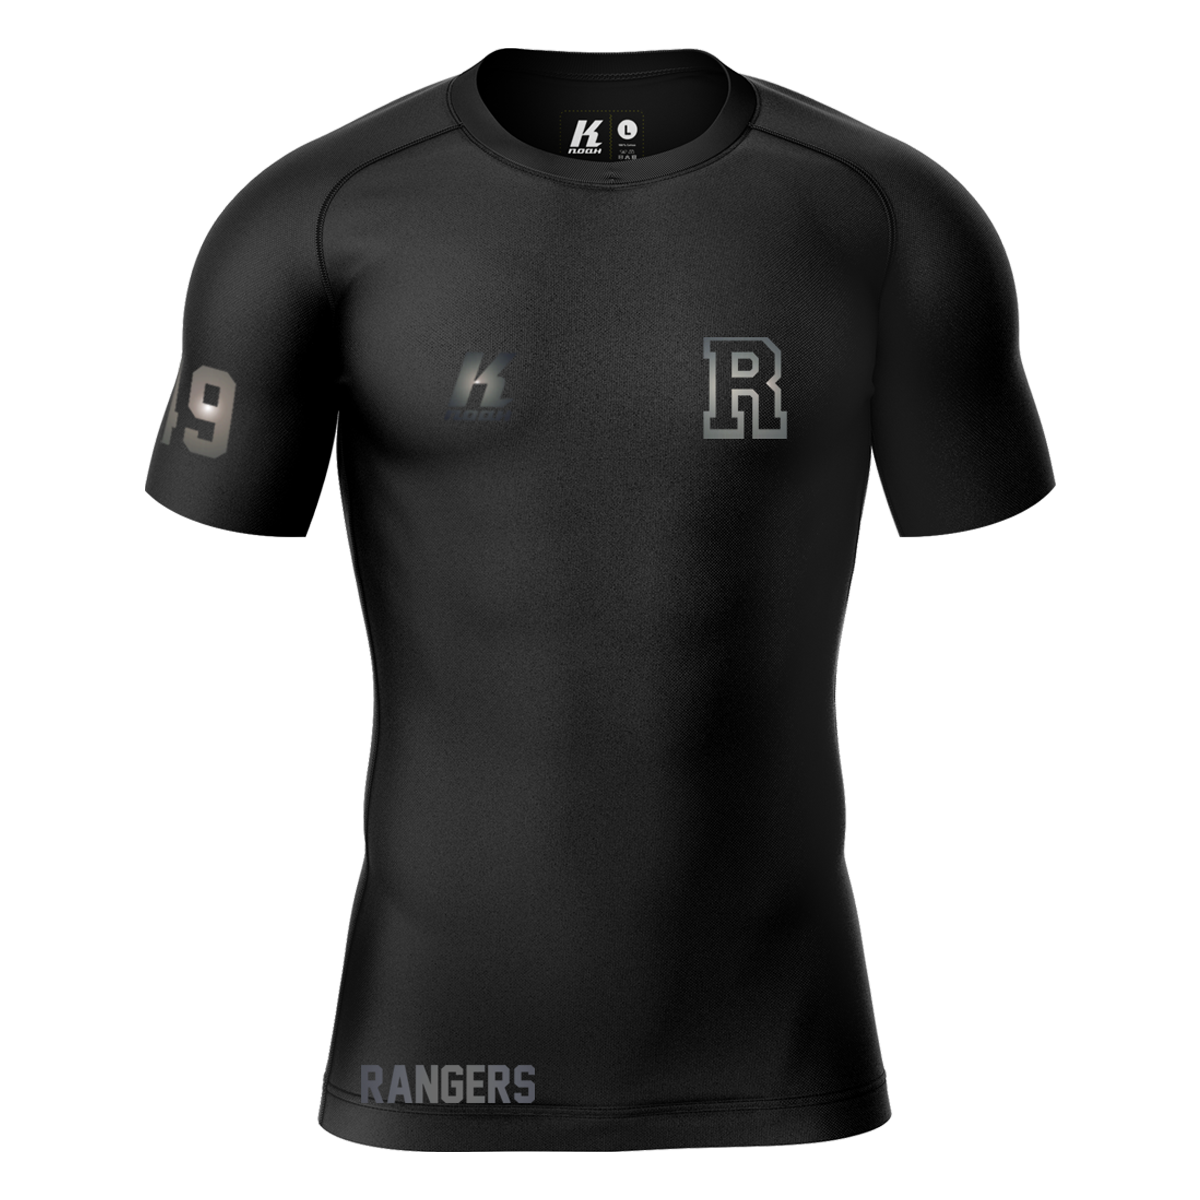 Rangers "Blackline" K.Tech Compression Shortsleeve Shirt with Playernumber/Initials